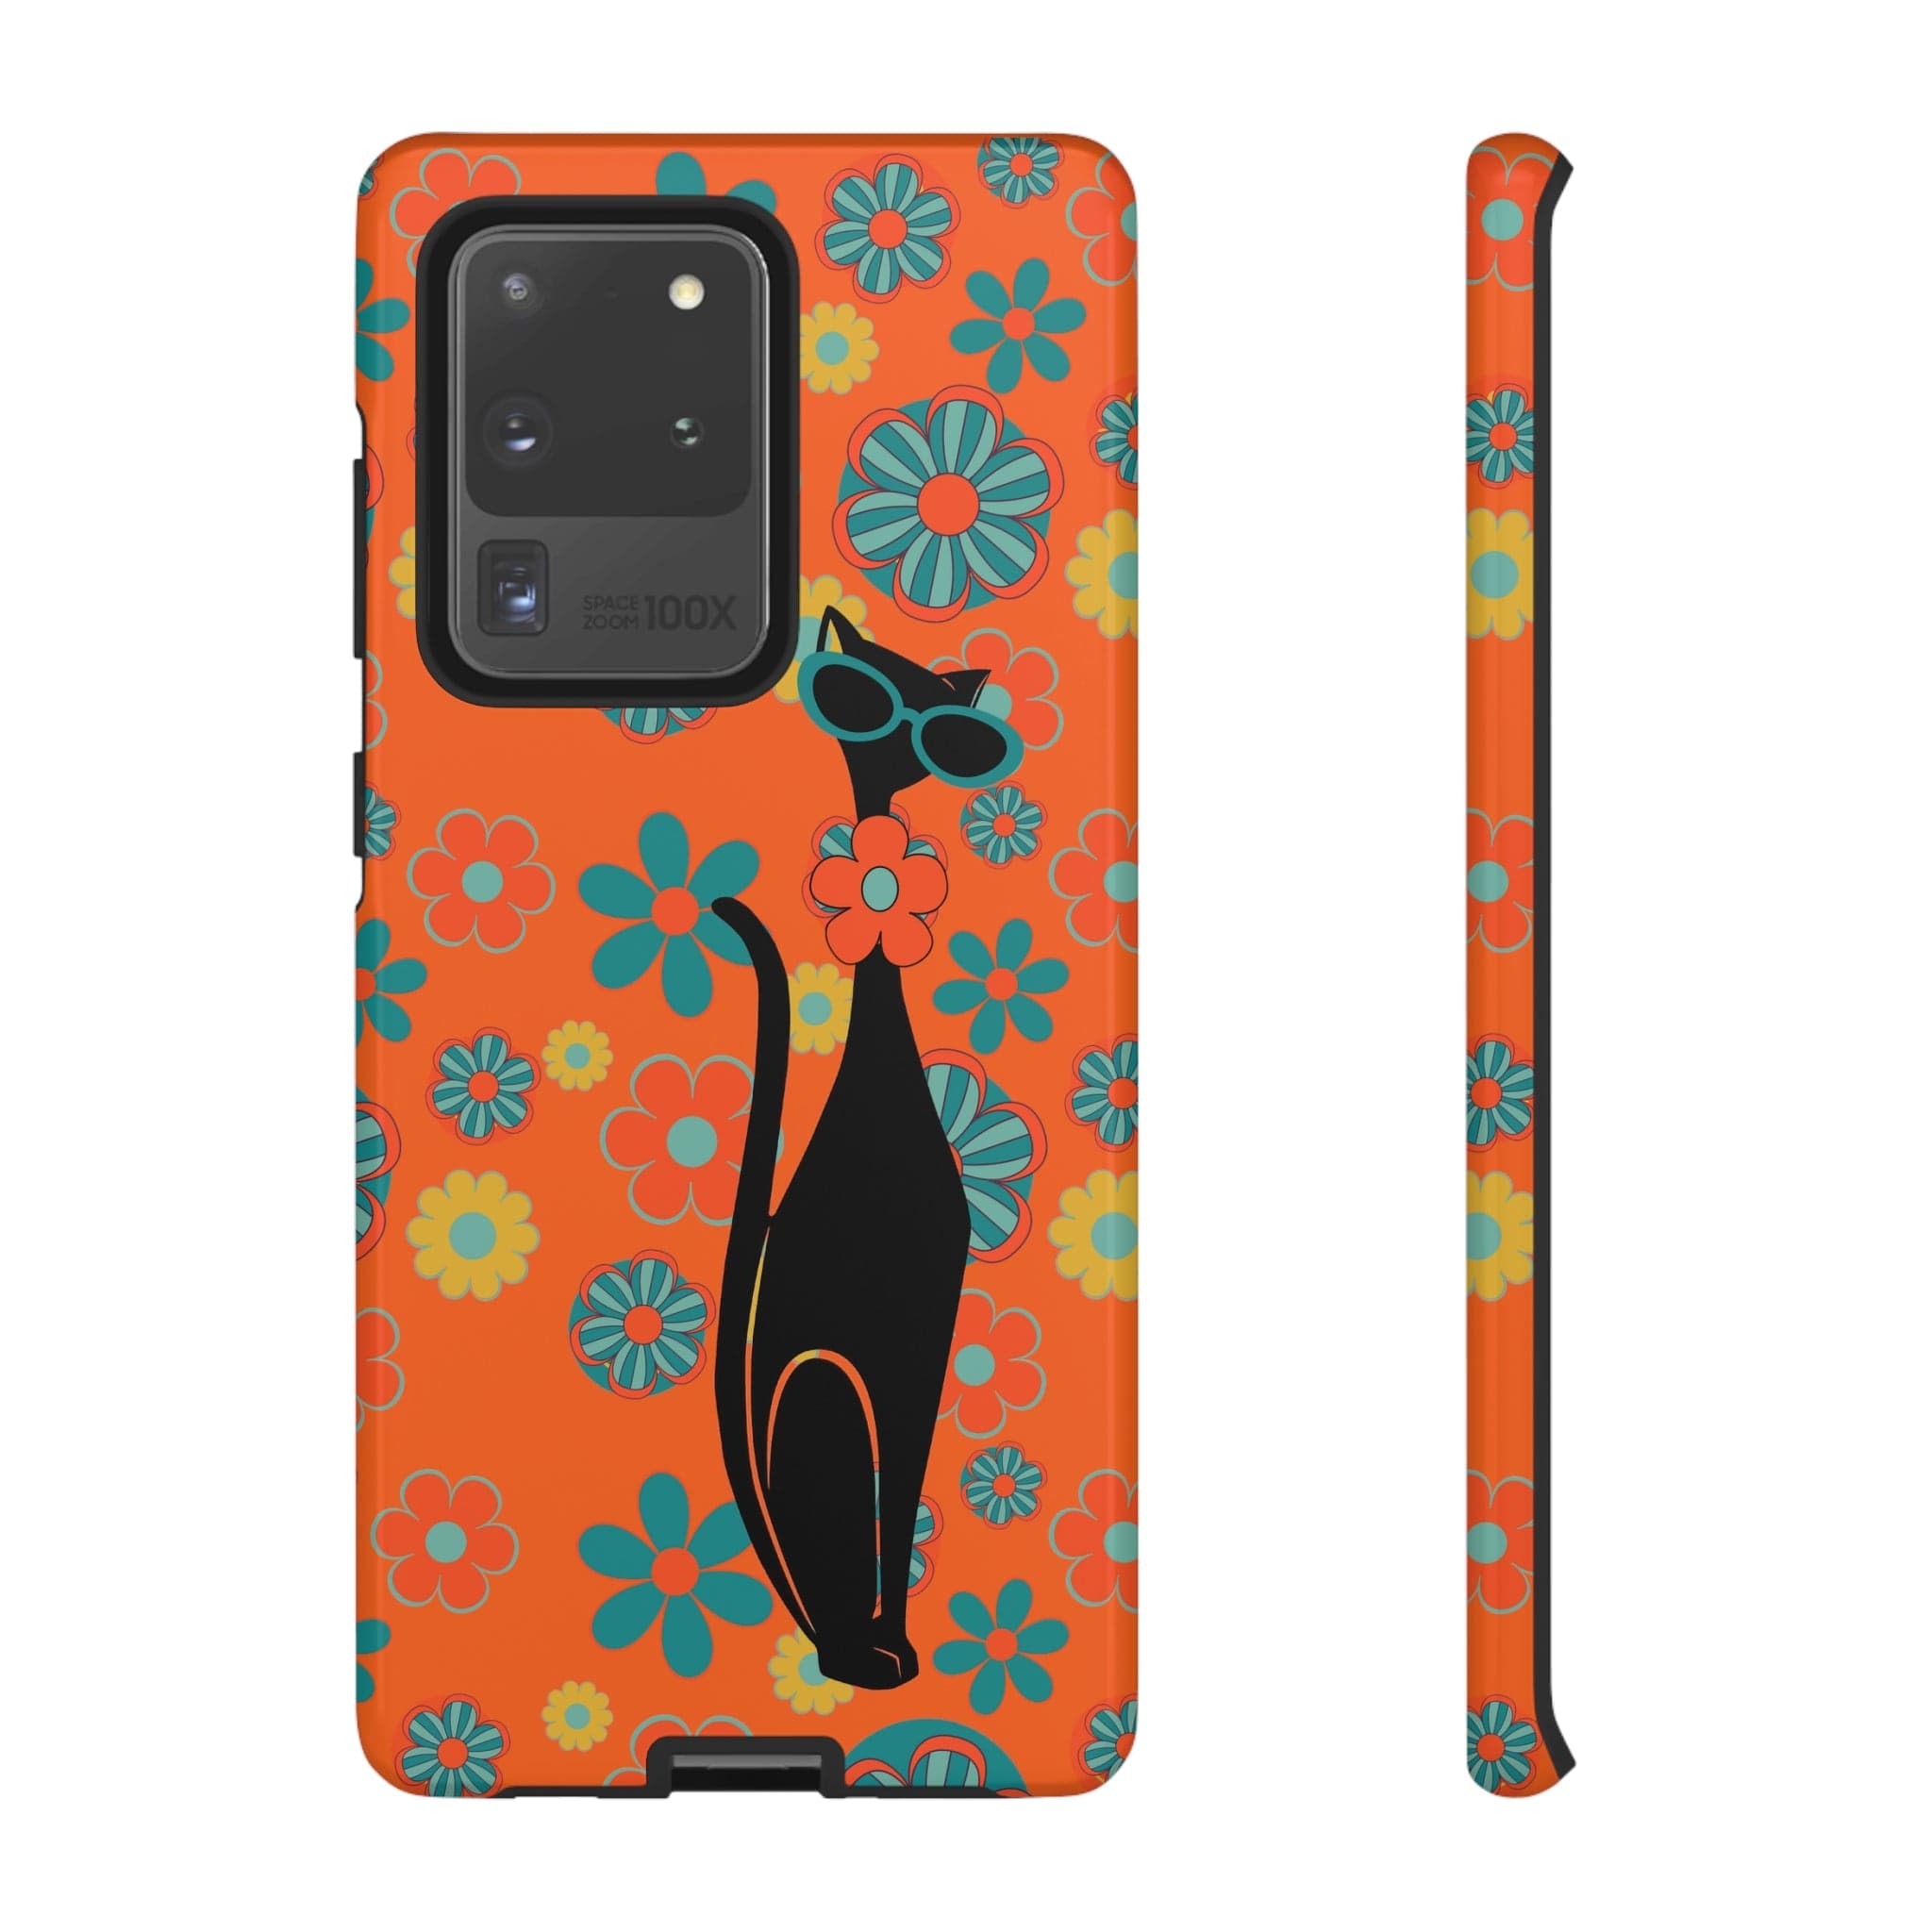 Flower Power, Retro Groovy Atomic Cat, Hipster Style Orange Samsung Galaxy and Google Pixel Tough Cases Phone Case Samsung Galaxy S20 Ultra / Glossy